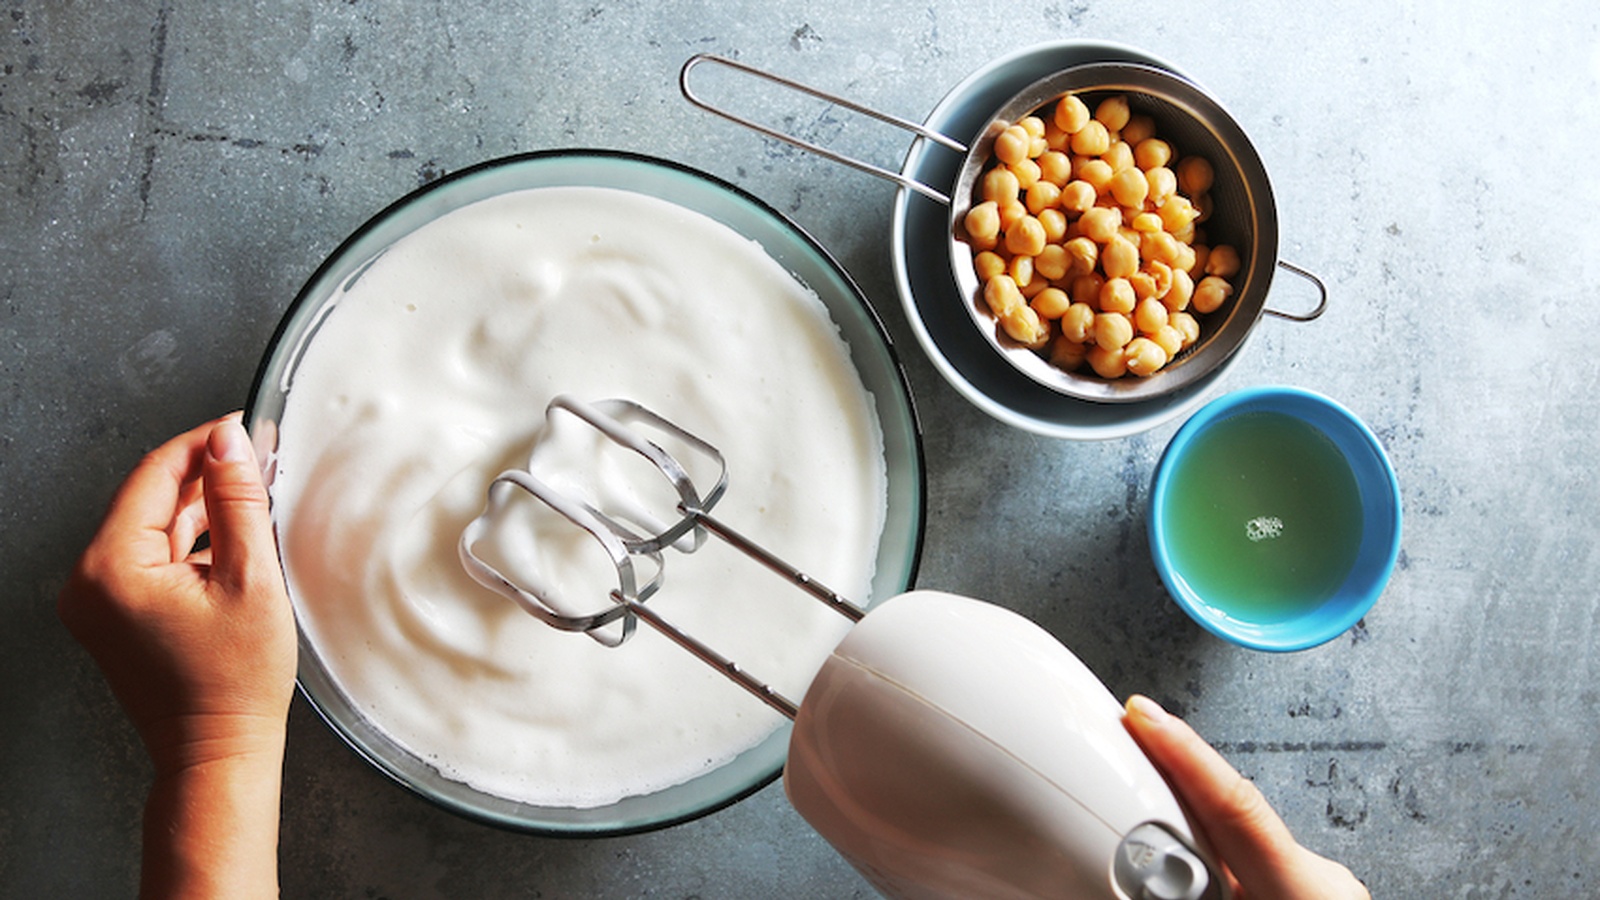 Aquafaba: What Is It & What Can You Do With It?